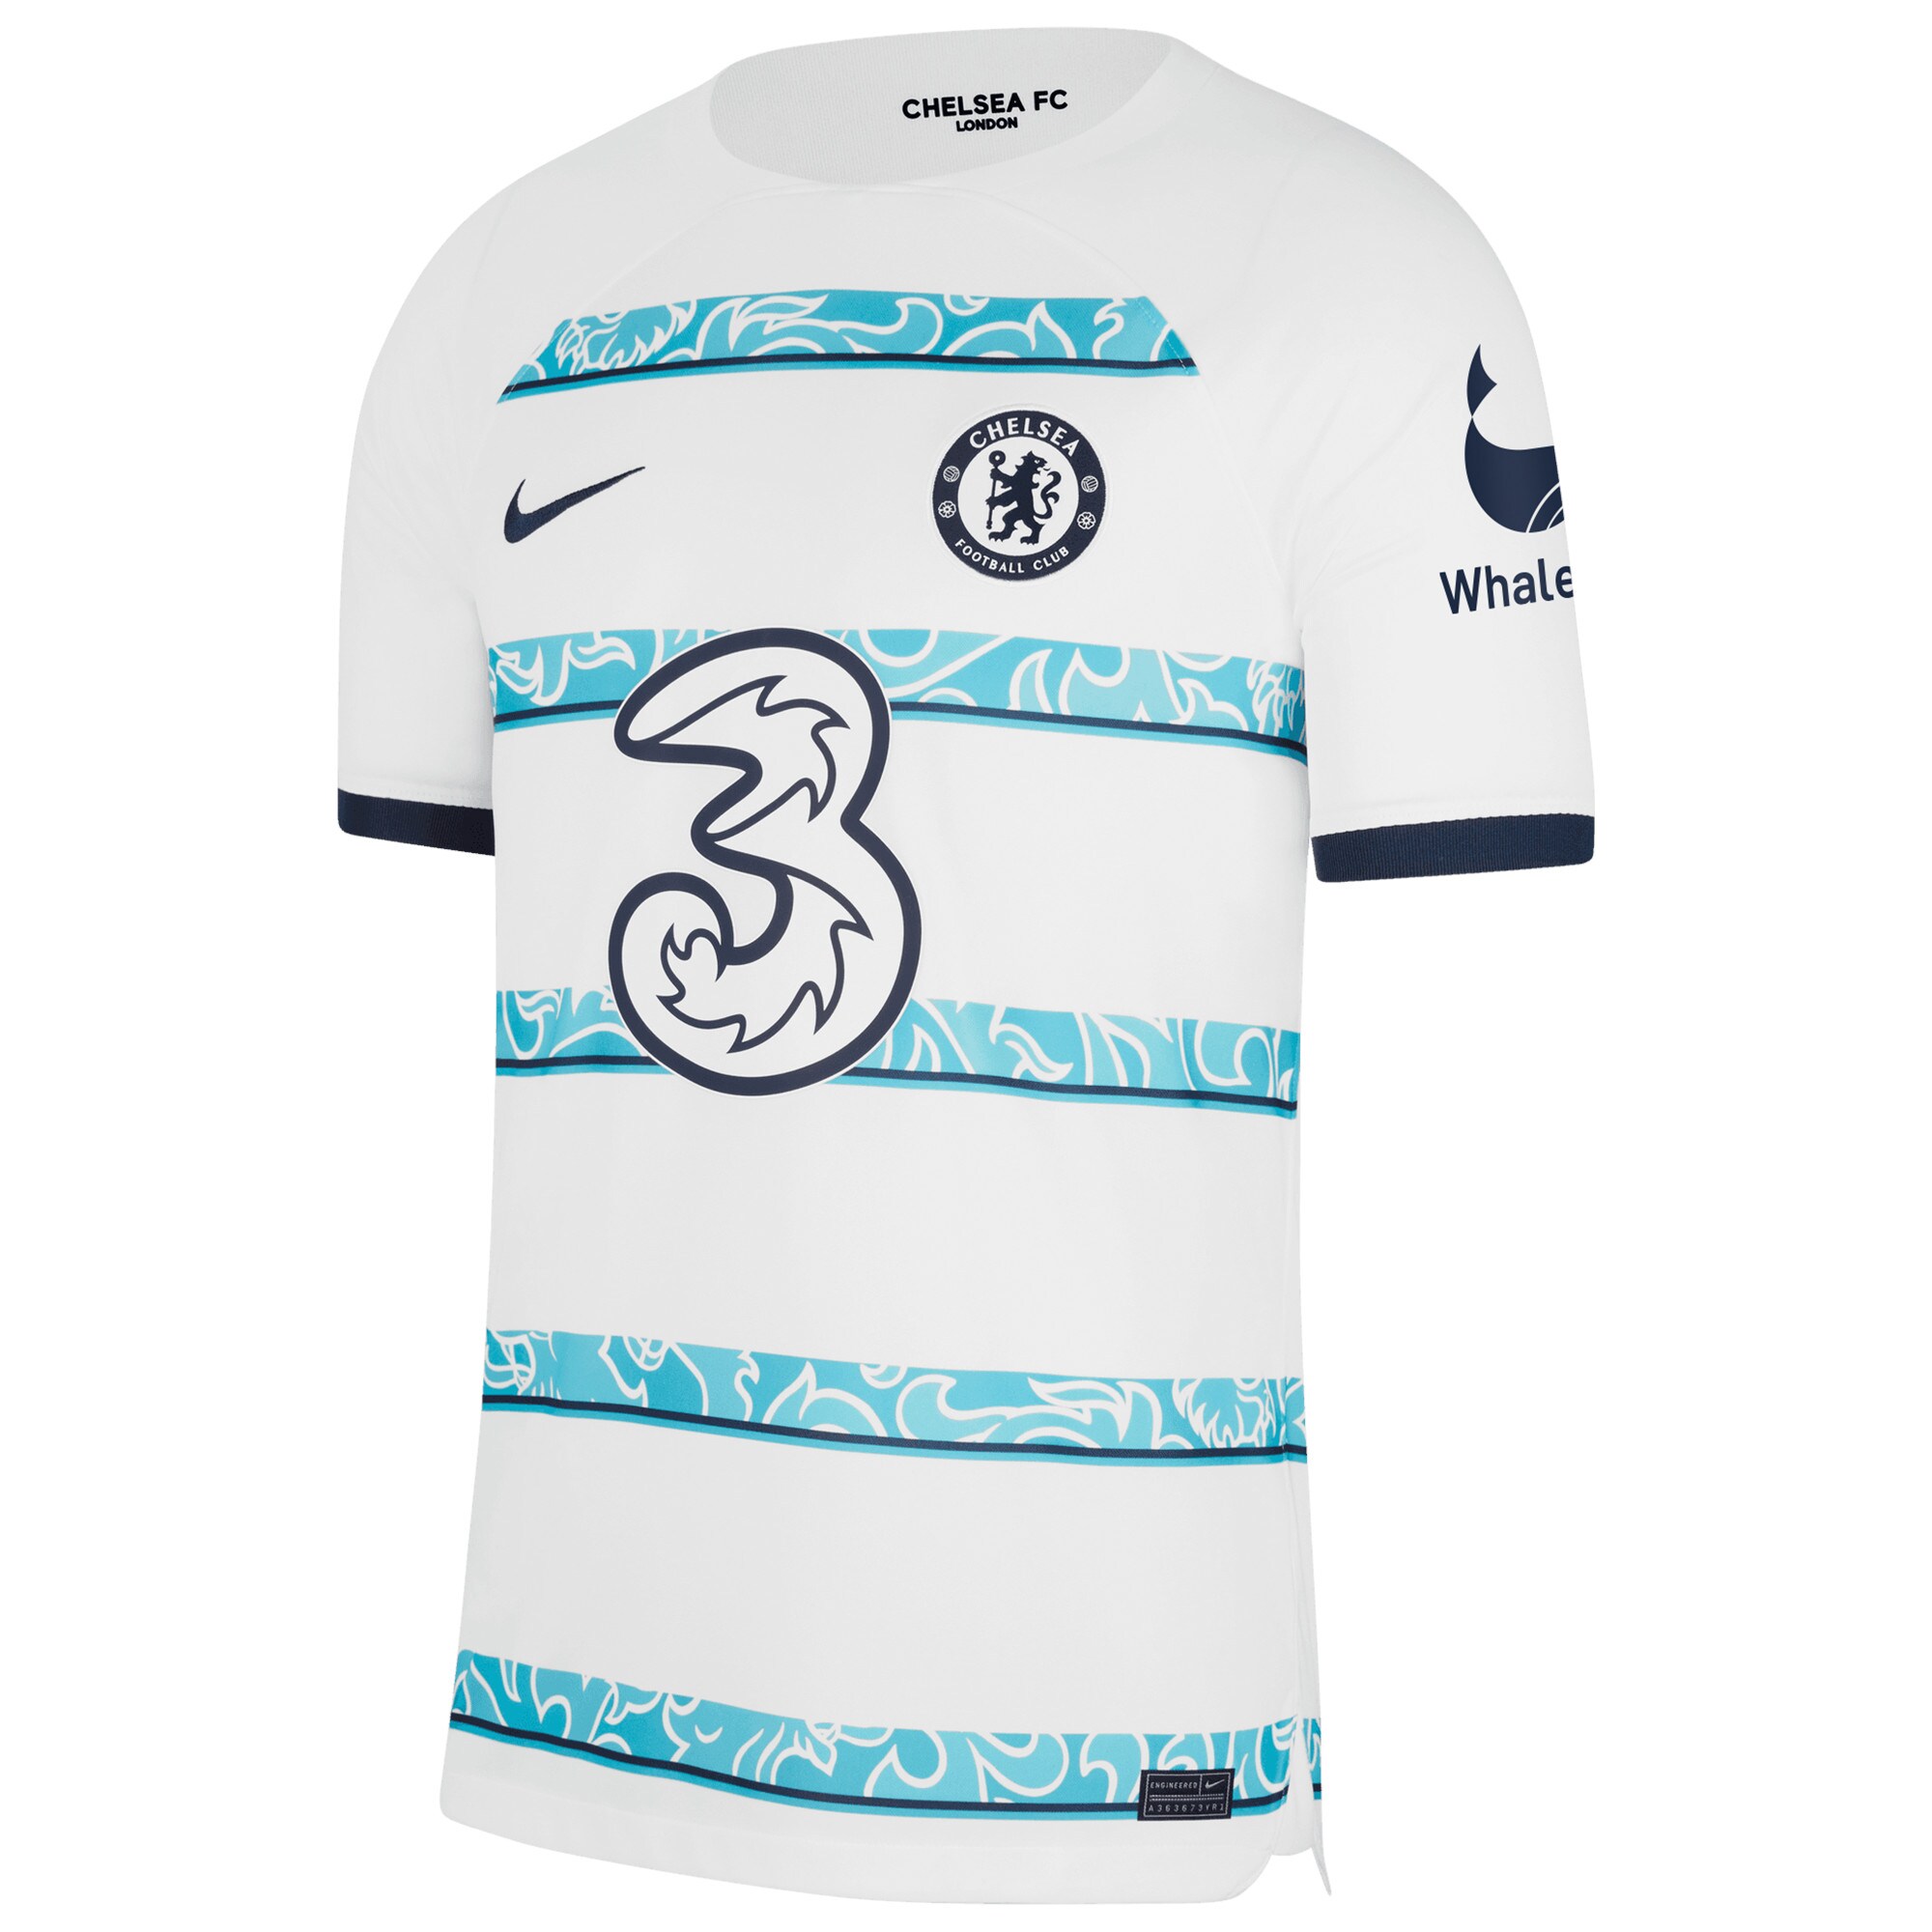 Chelsea Away Cup Stadium Shirt 2022-23 with Gallagher 23 printing